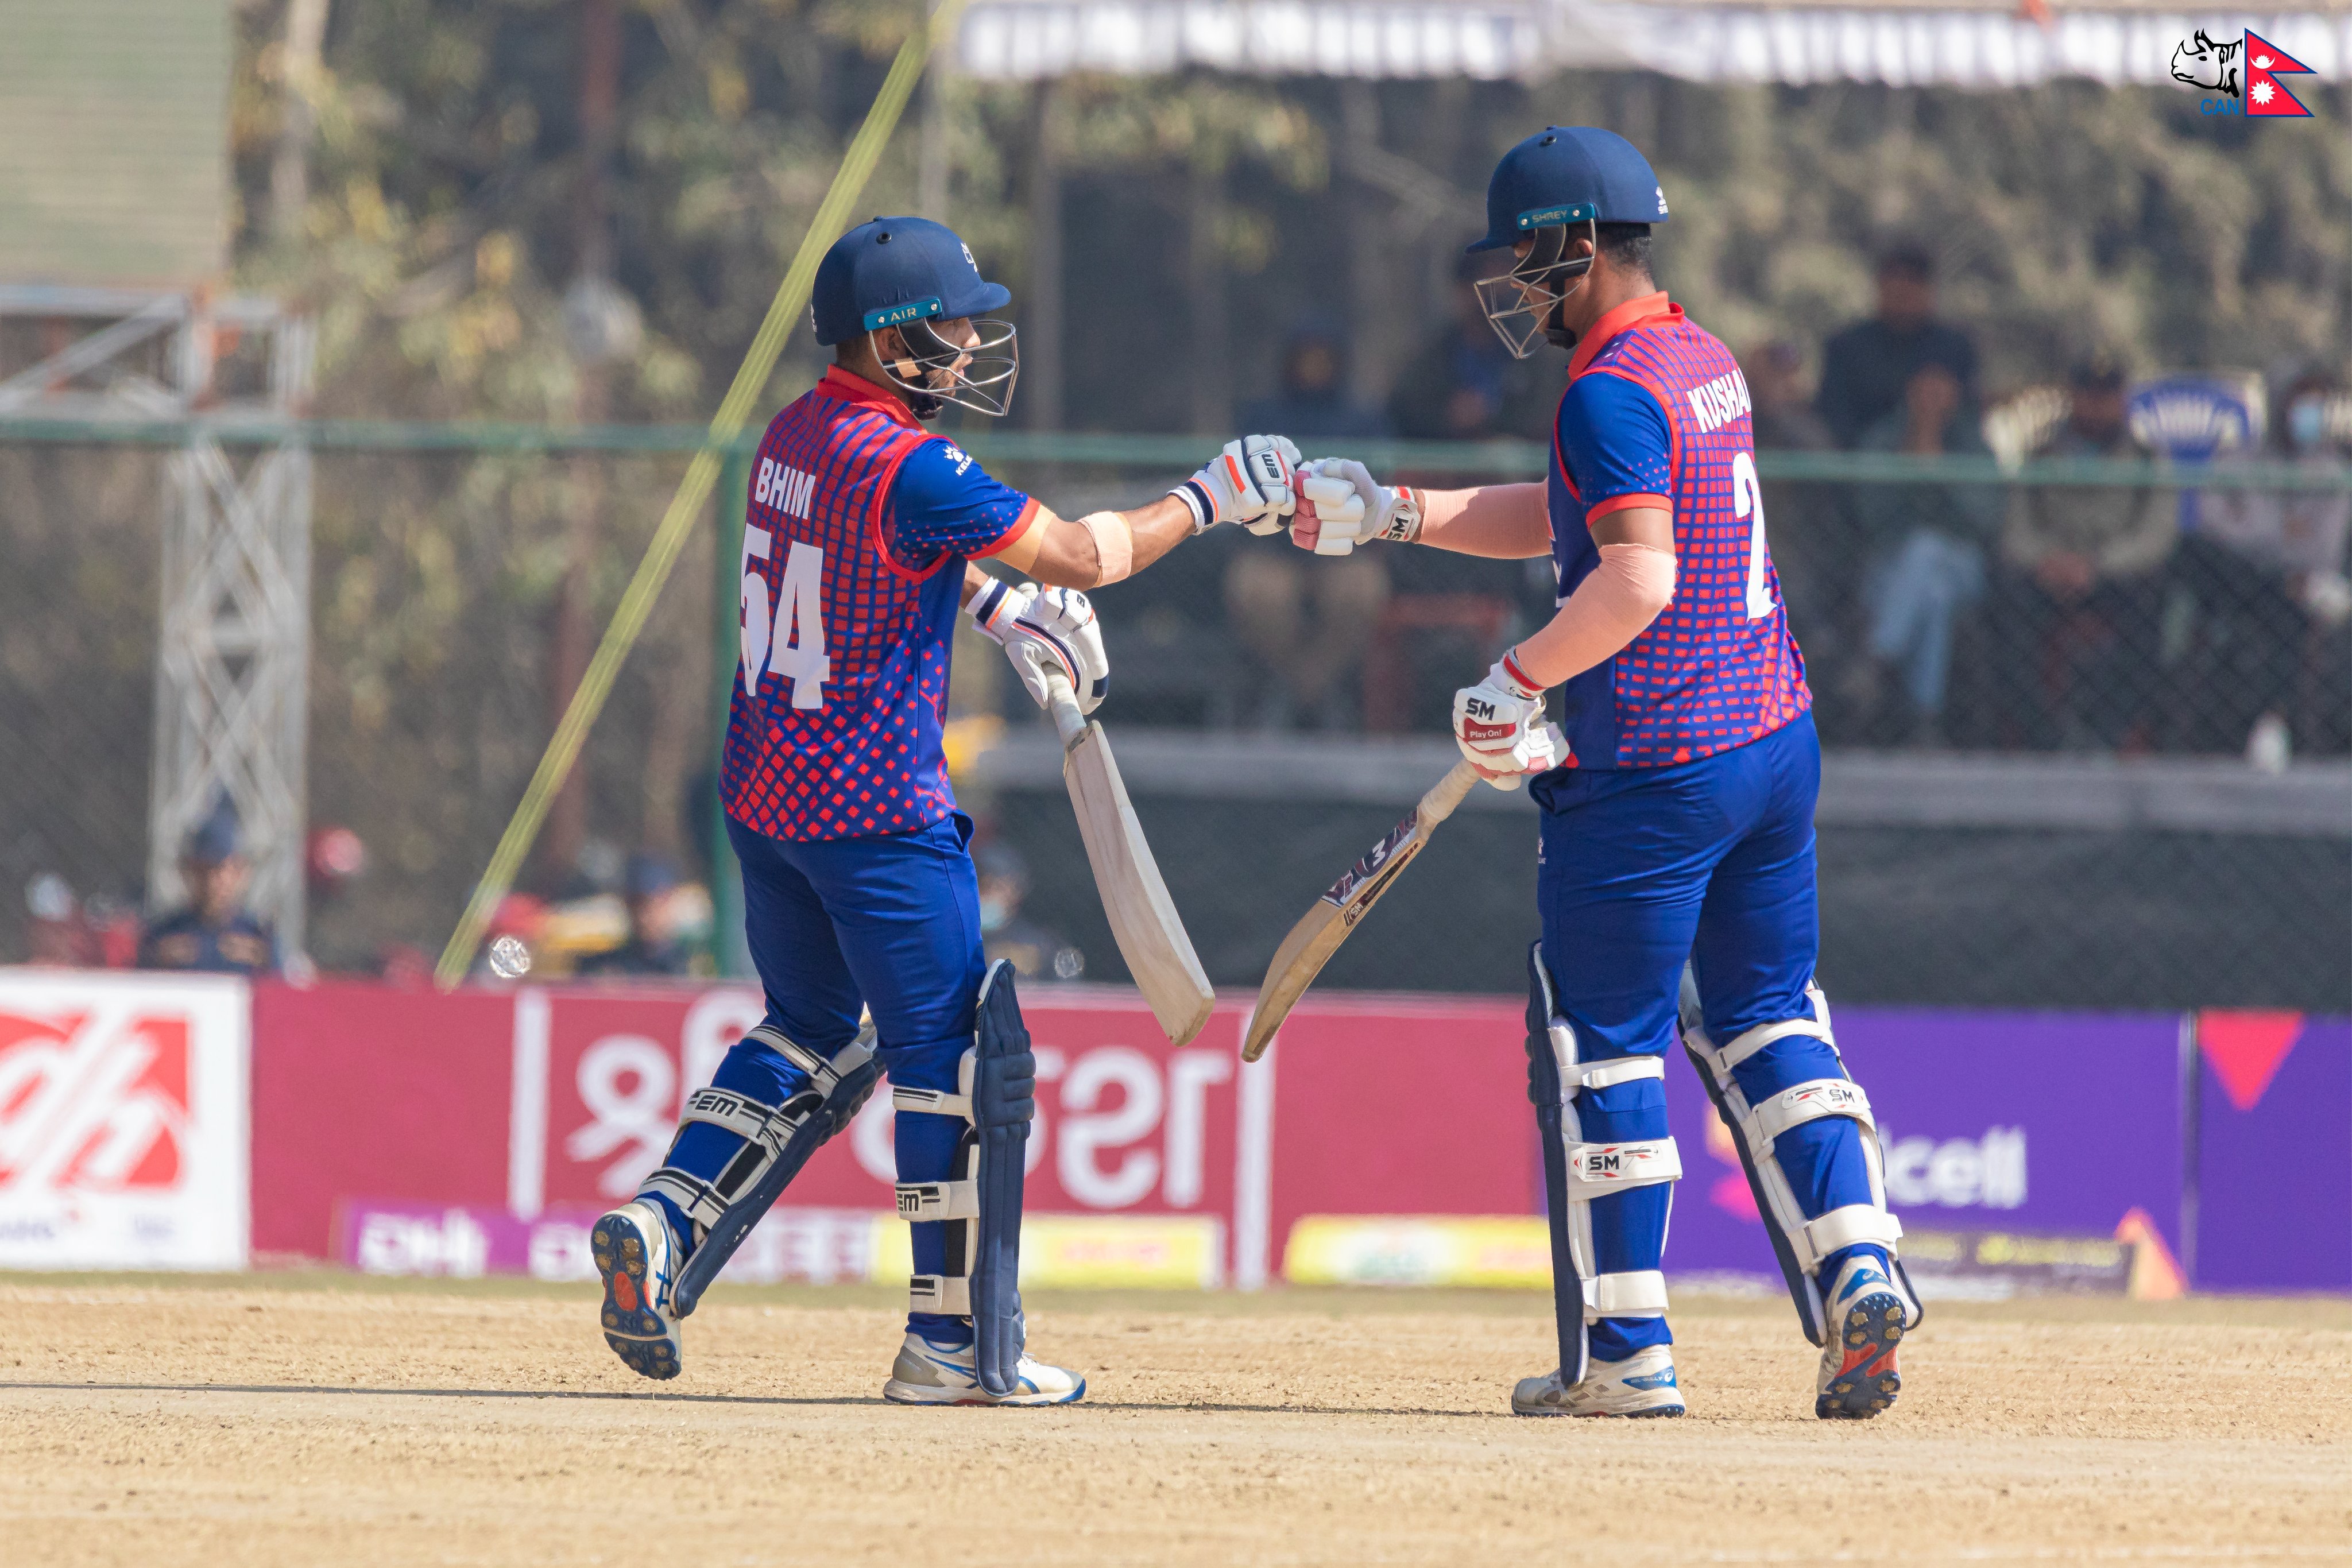 Nepal sets a target of 133 runs for Namibia to a secure victory